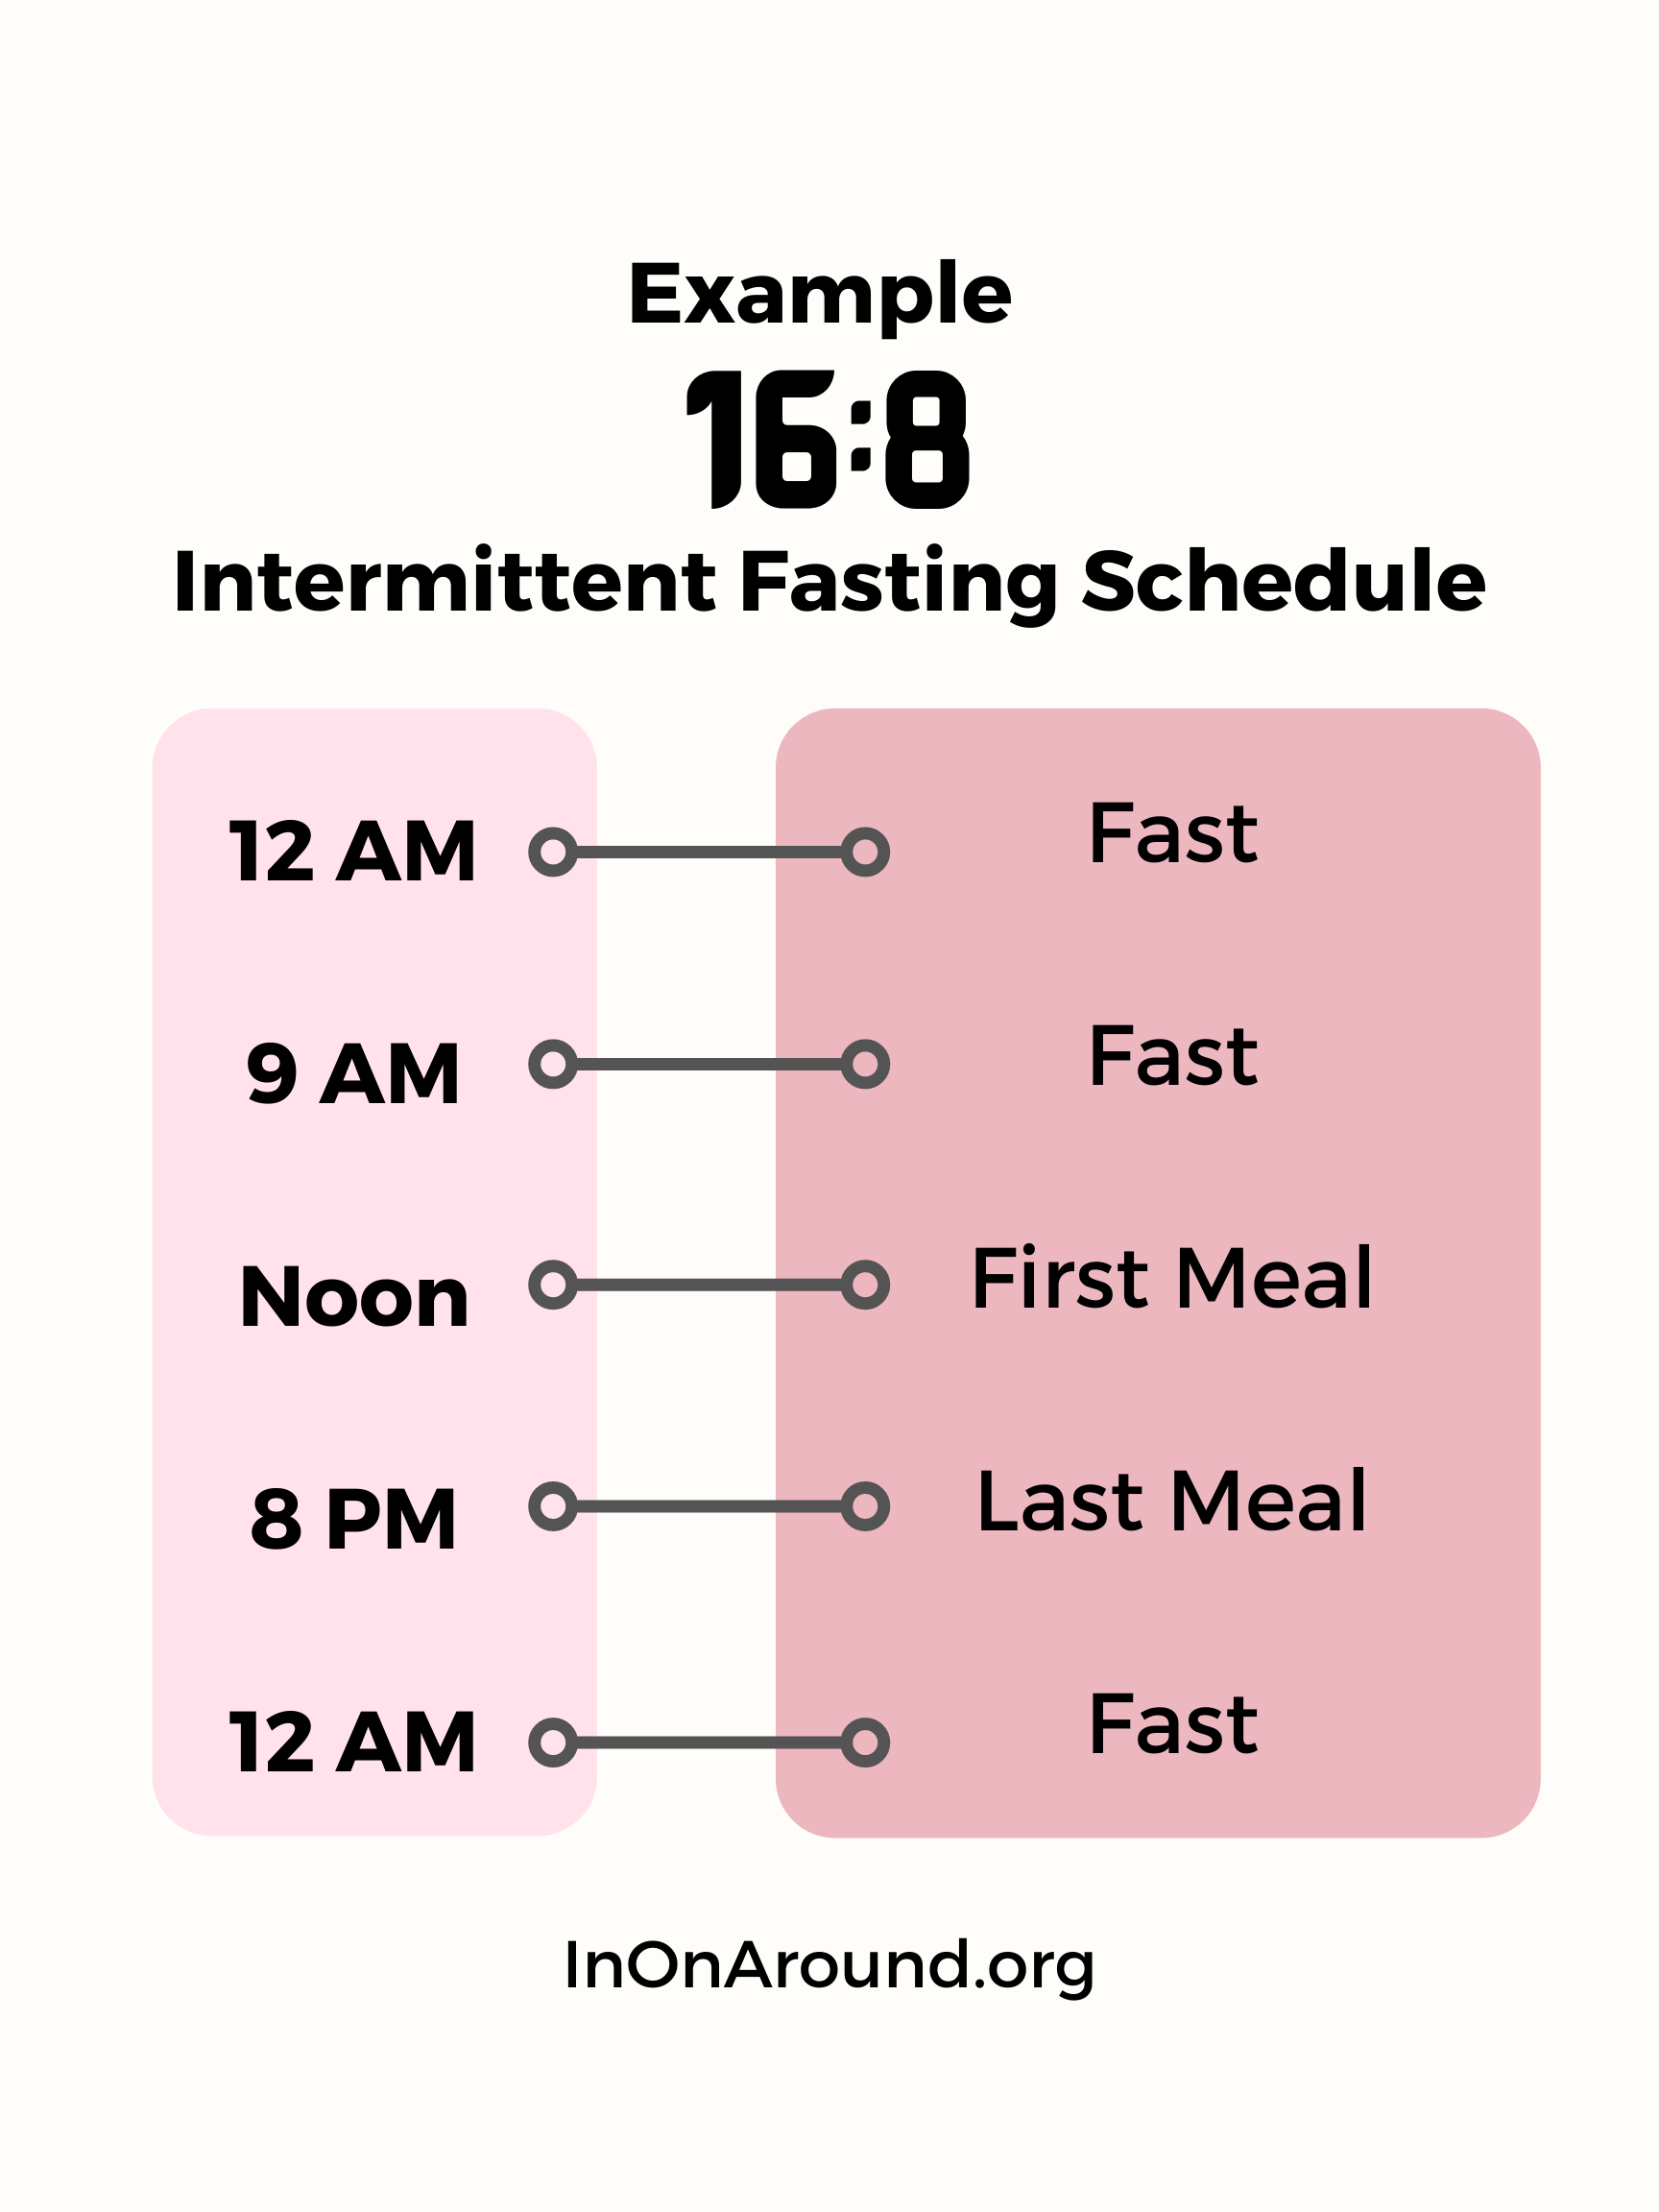 Intermittent Fasting Example Schedule